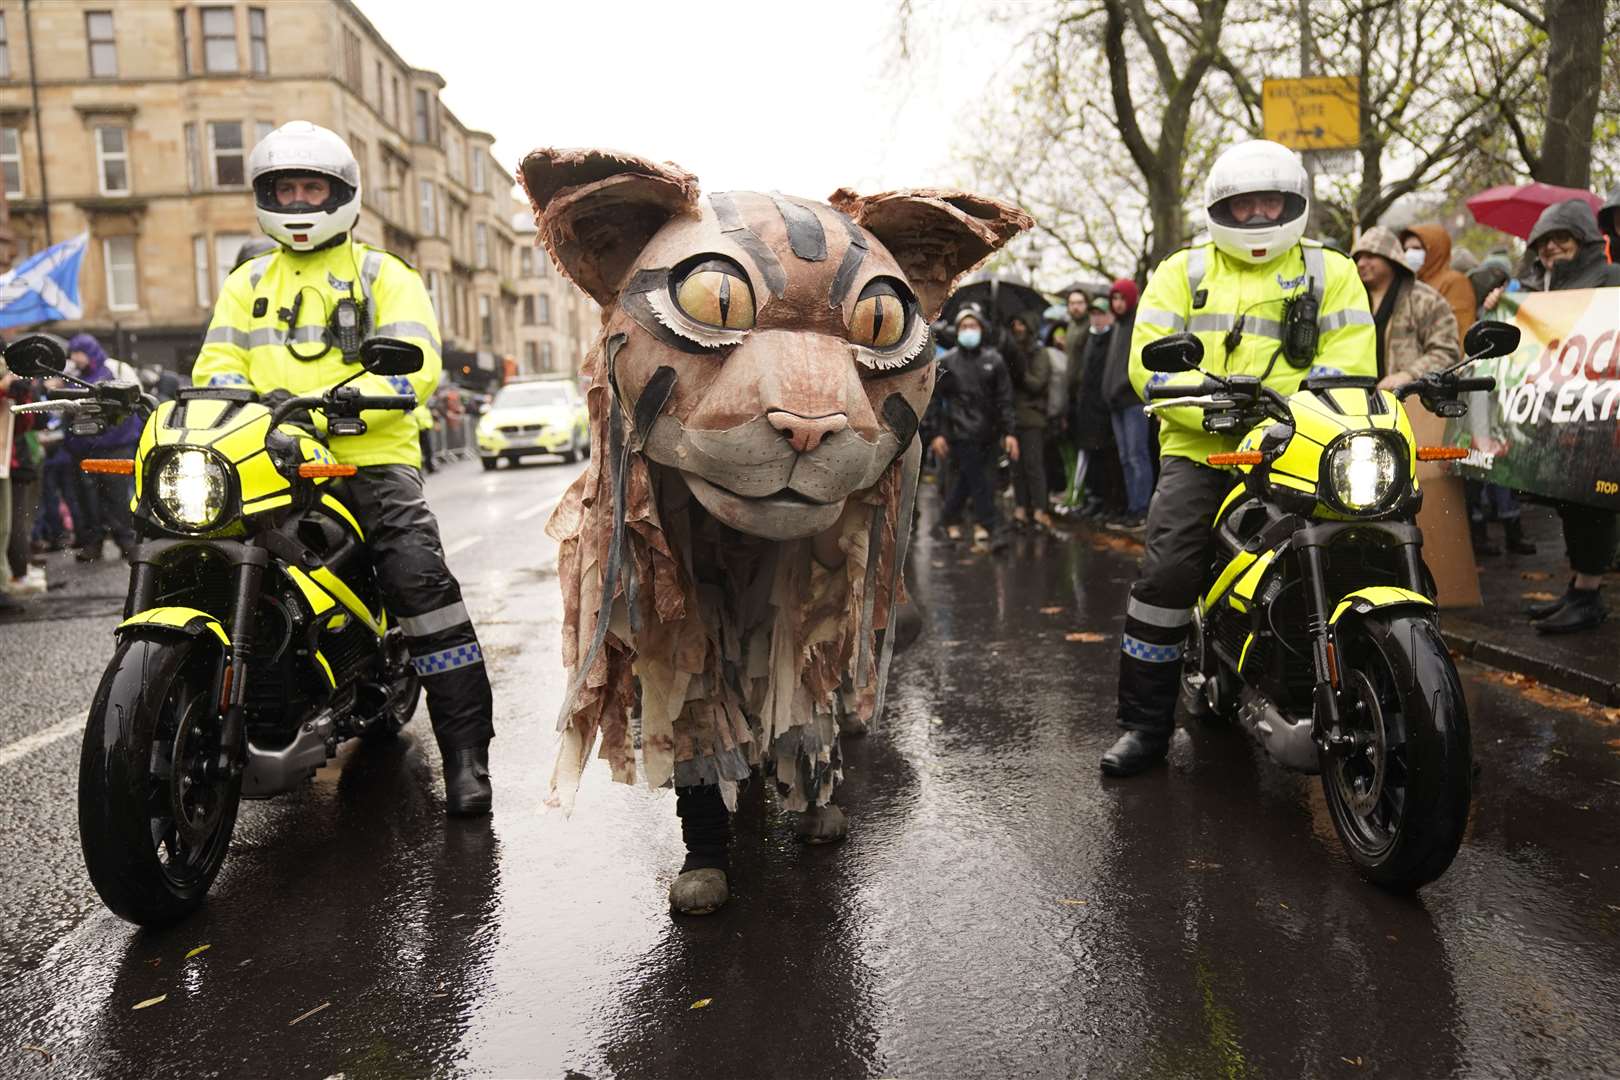 Protesters wore costumes to march through Glasgow (Danny Lawson/PA)